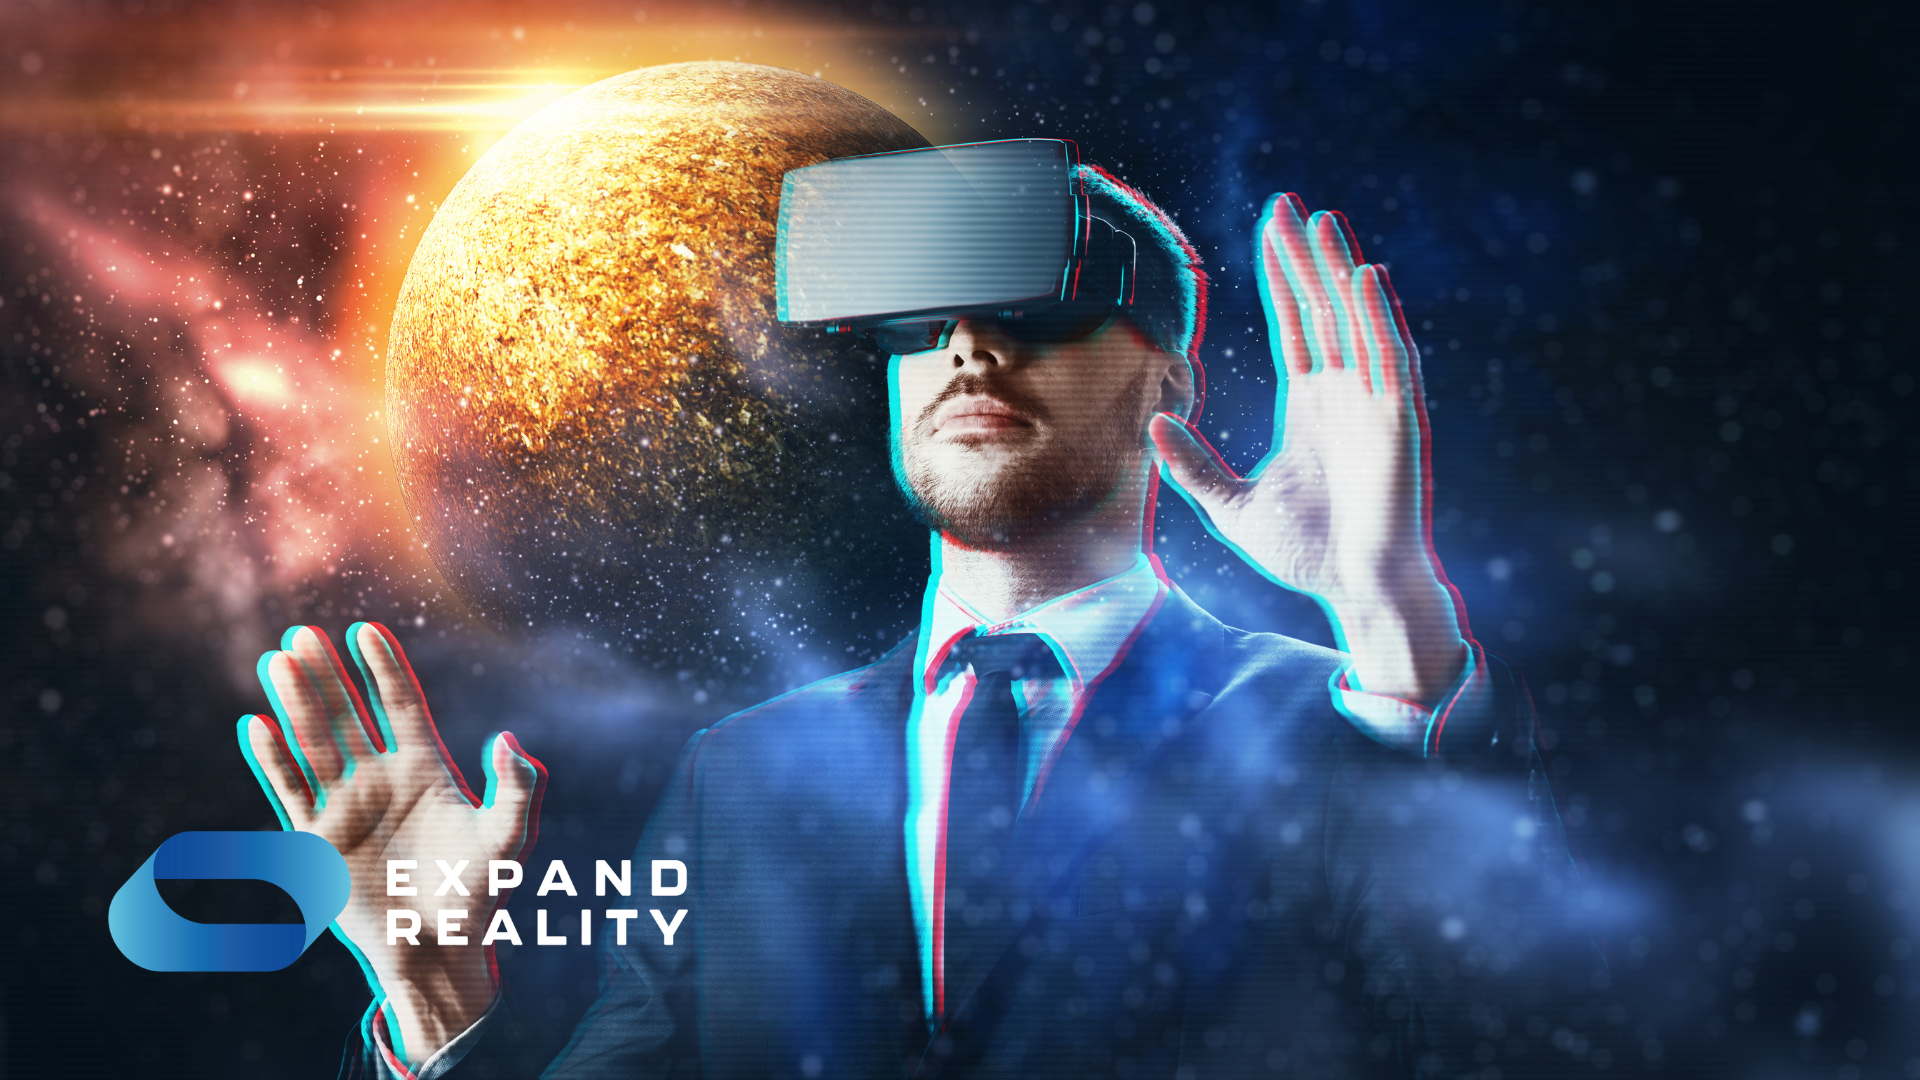 New to extended reality? Enjoy this beginner's guide to XR industry terms – with our help, you'll nail the technological jargon in no time!